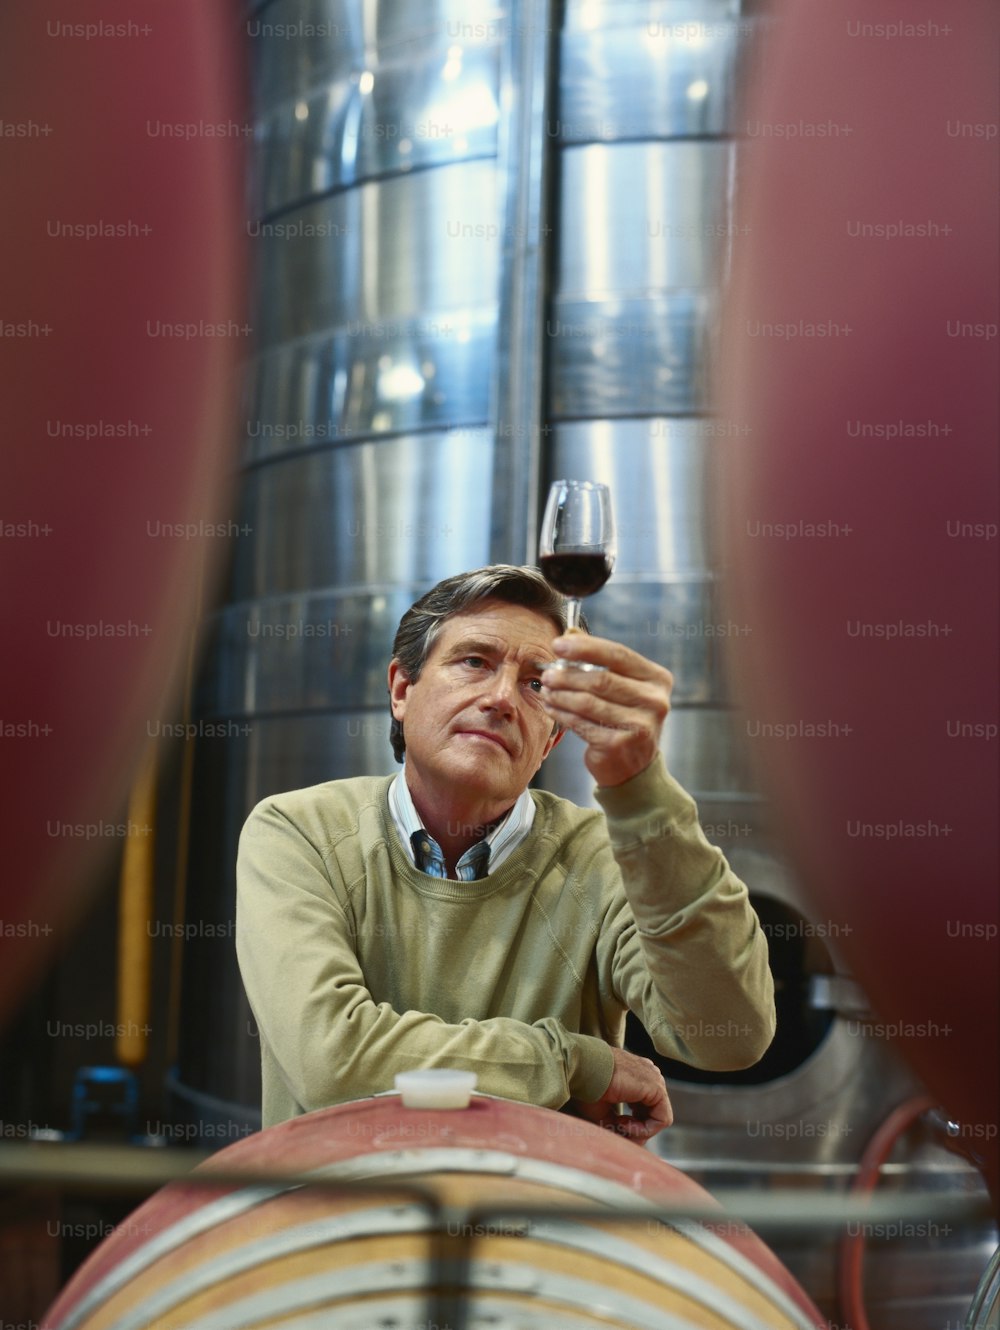 a man holding a glass of wine in front of a barrel